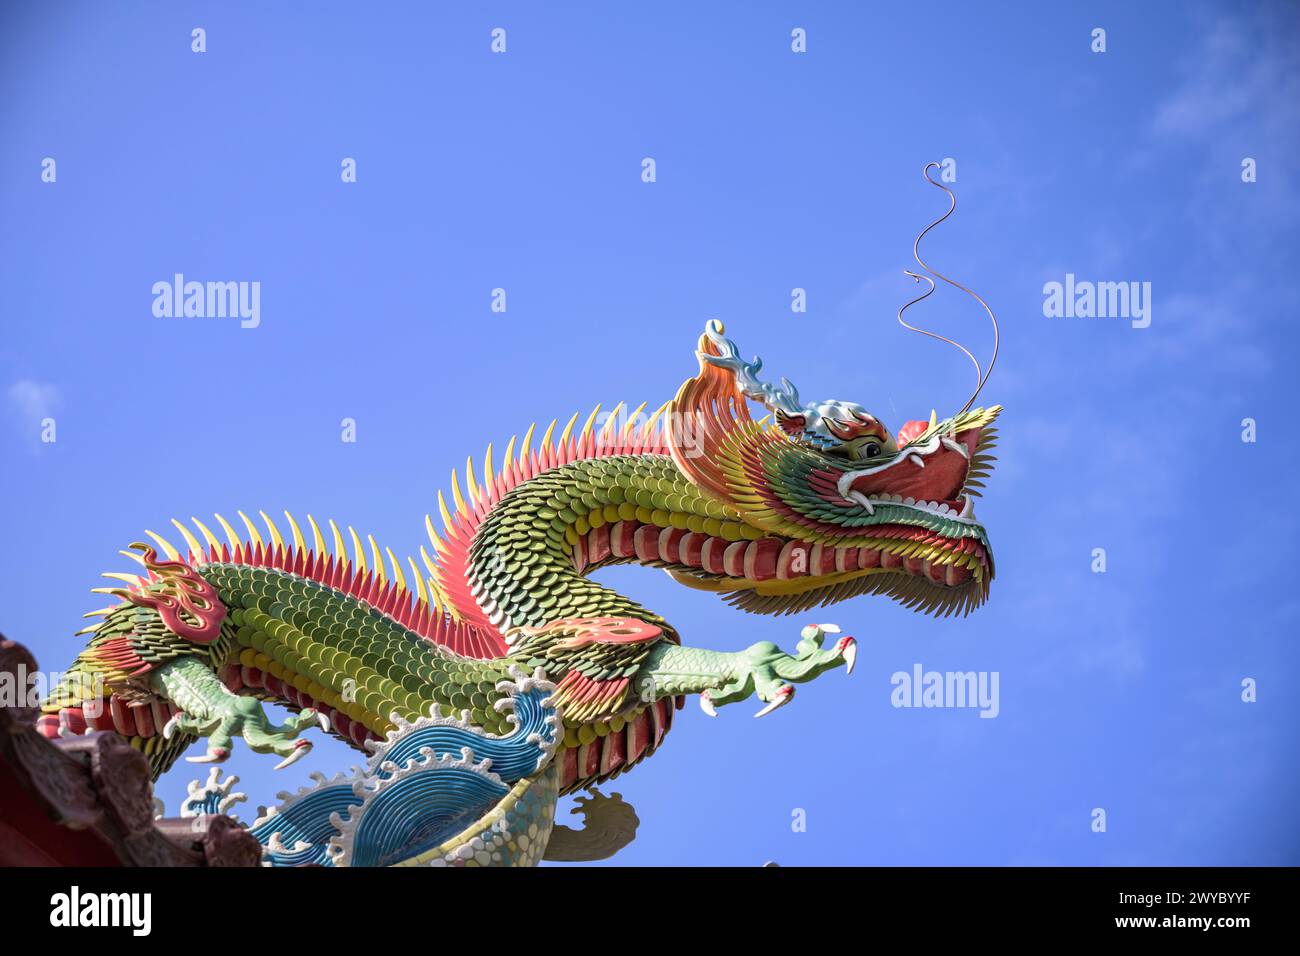 Colorful and intricate dragon sculptures adorning the roof of a traditional Taiwanese temple against a clear sky Stock Photo